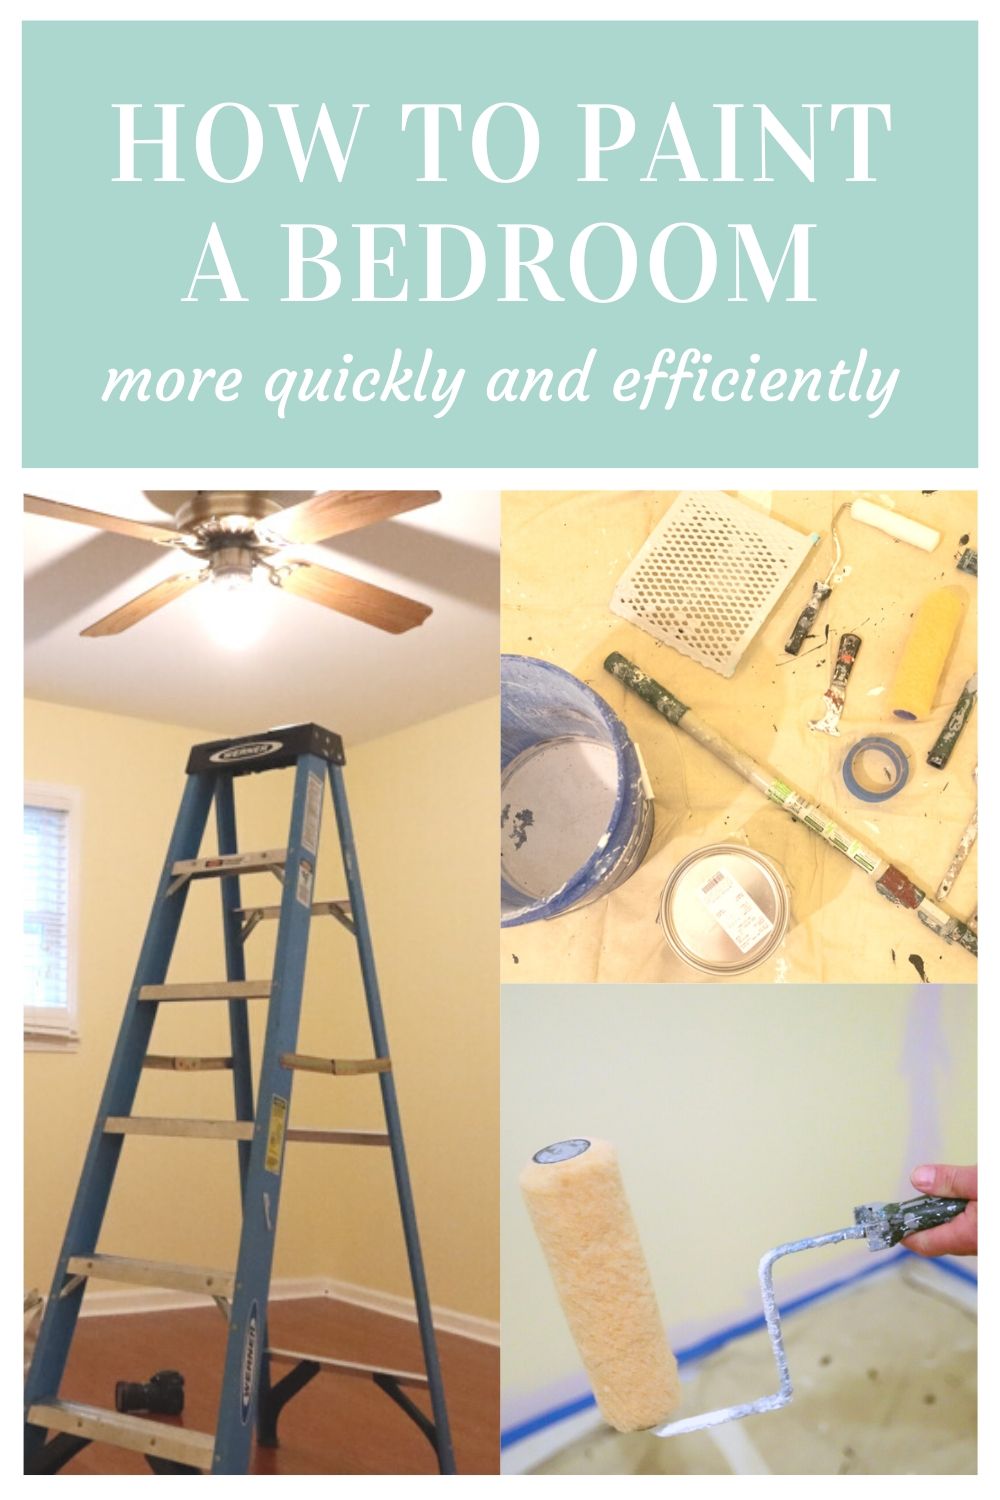 Painting a bedroom quickly and efficiently